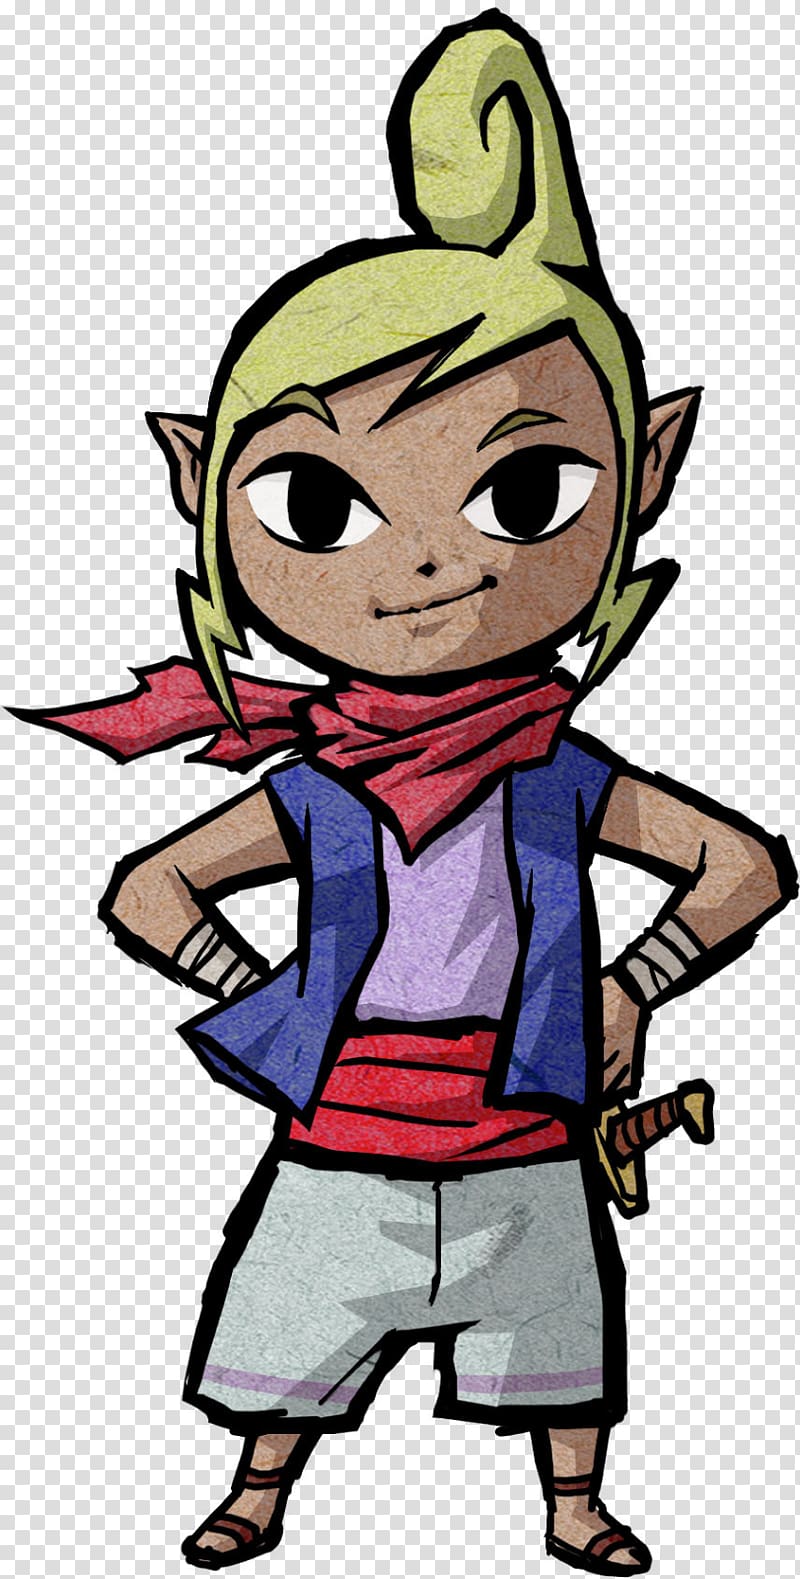 The Legend of Zelda: The Wind Waker The Legend of Zelda: Spirit Tracks The Legend of Zelda: Twilight Princess HD Princess Zelda The Legend of Zelda: Ocarina of Time, the legend of zelda transparent background PNG clipart